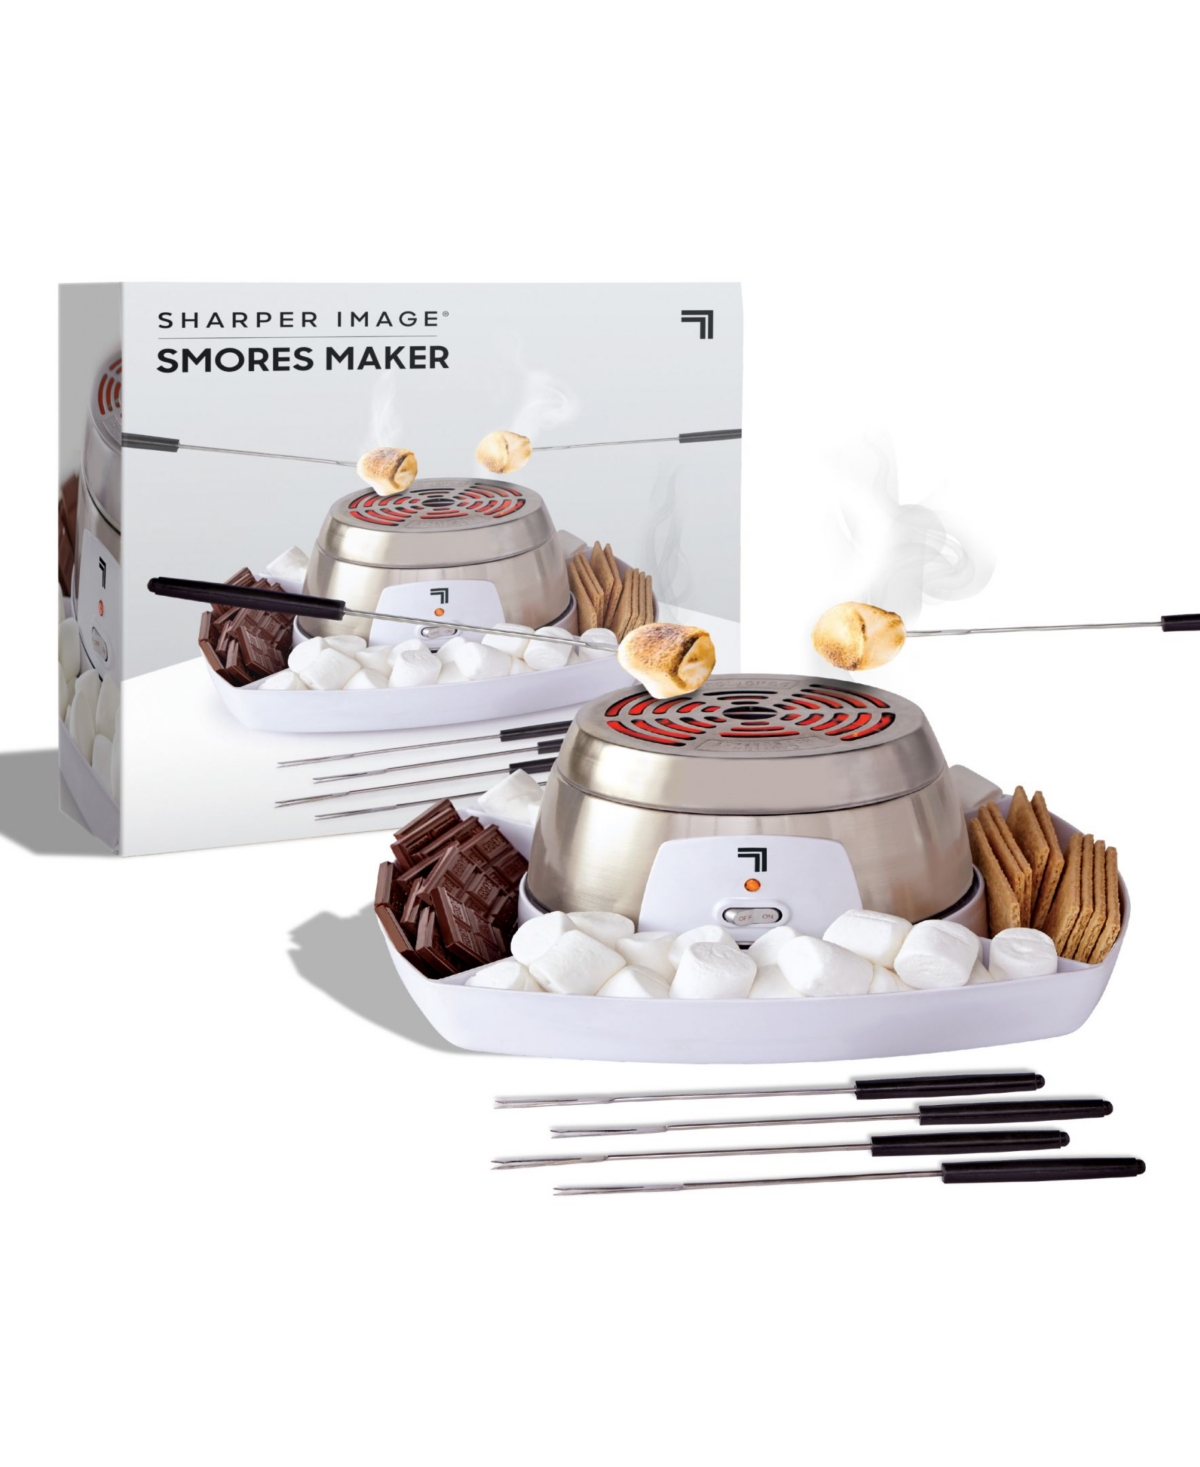 Sharper Image Electric Tabletop S'mores Maker For Indoors In Whitesilver